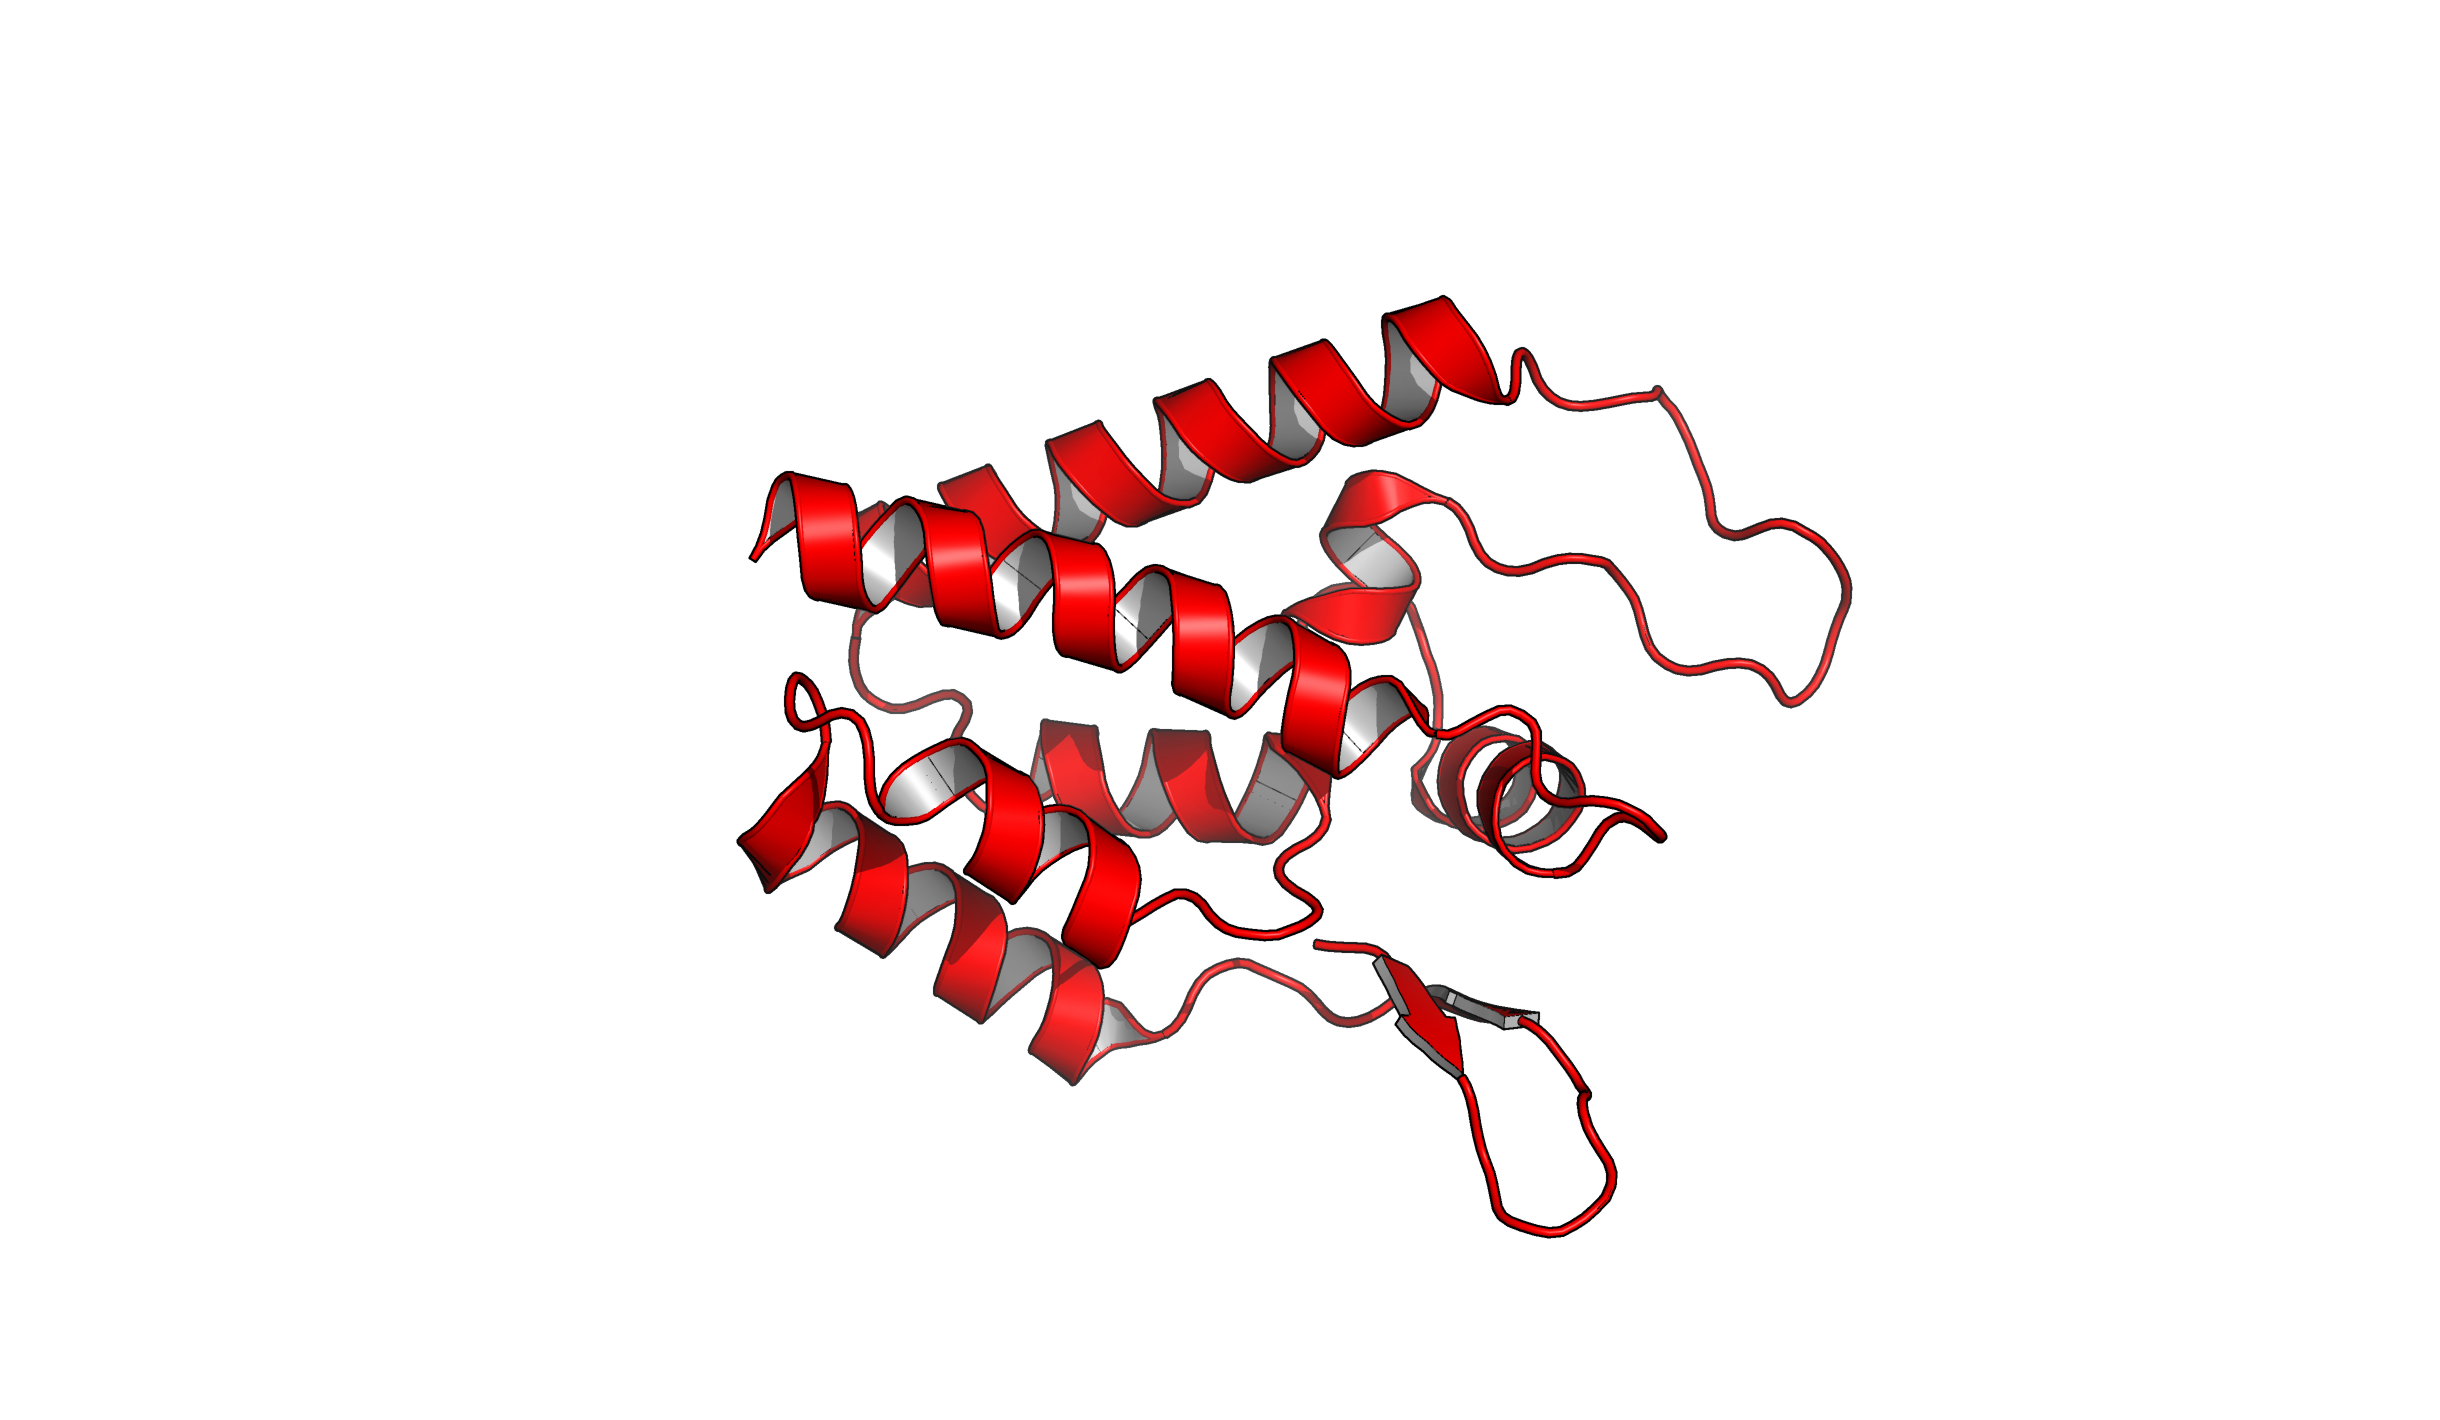  Result of a PyMOL script. A protein in fancy helices in red color is represented in high-quality resolution.